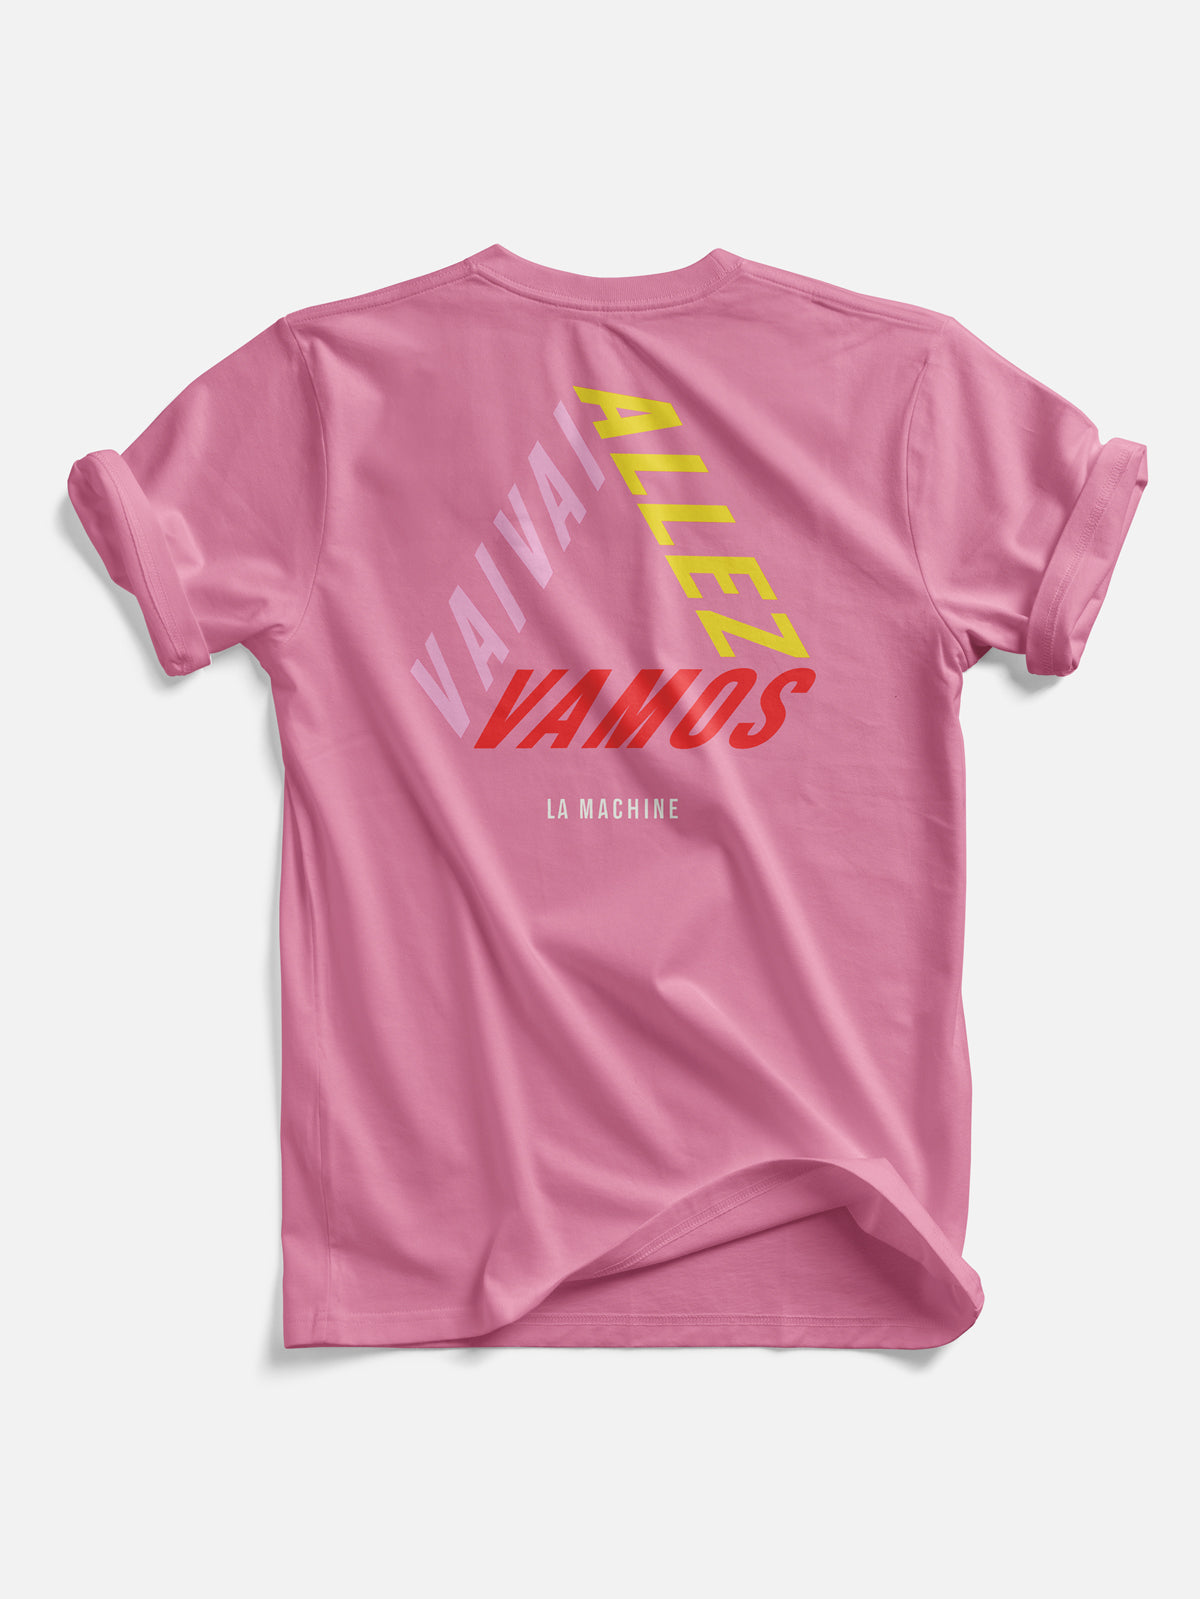 Vai Allez Vamos – Relaxed Fit – T-Shirt